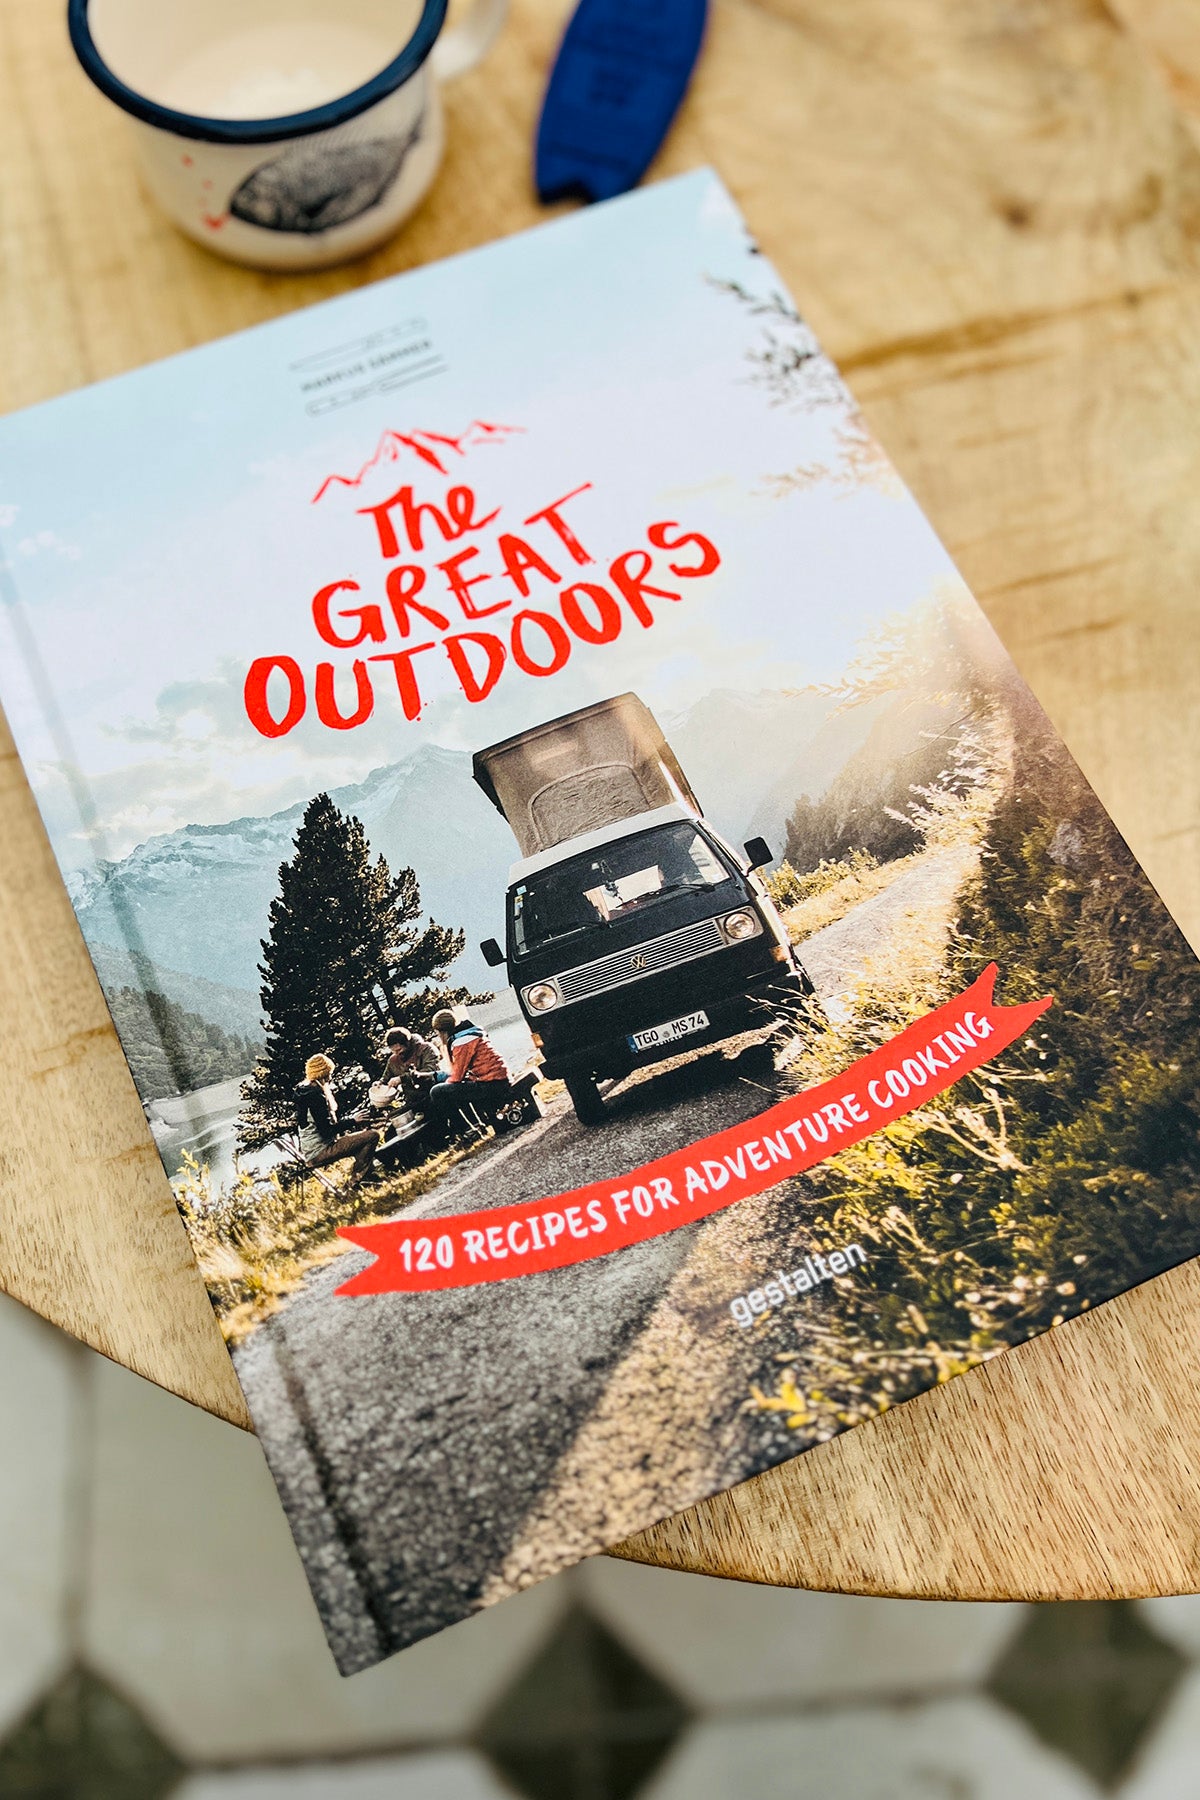 Book "The Great Outdoors"